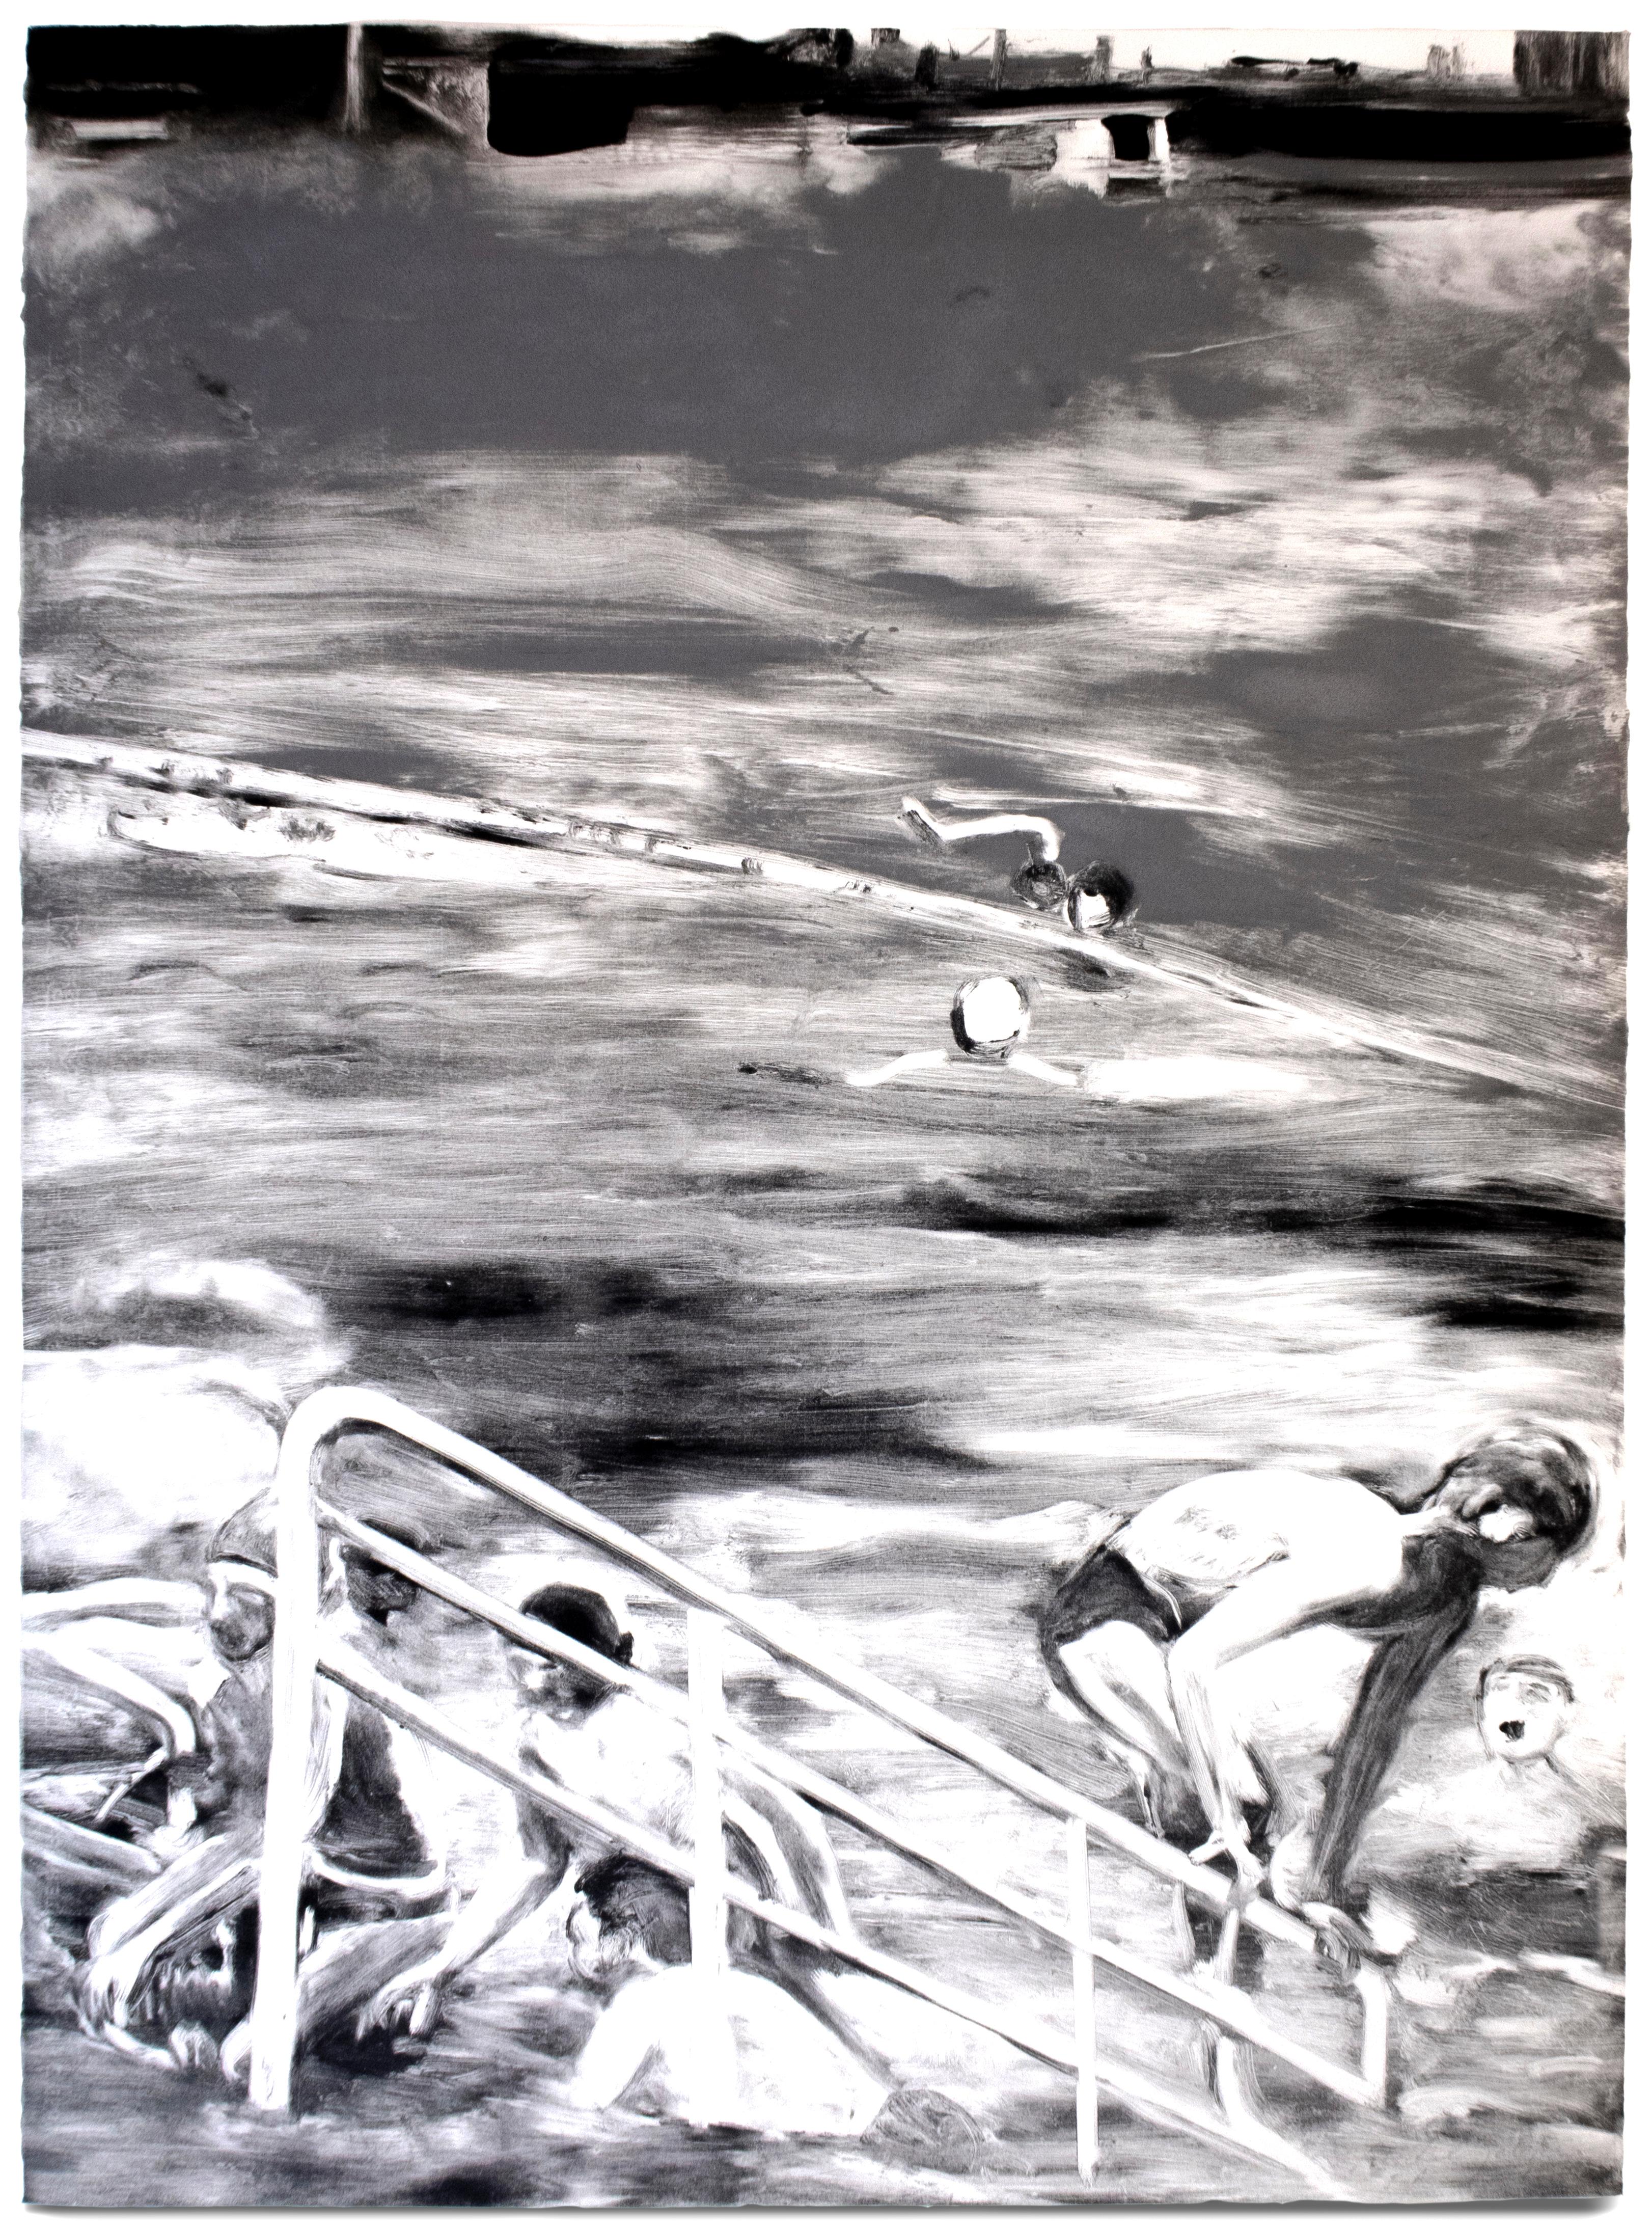 Temptation to Exist: black and white landscape of swimmers in pool  - Print by Michele Zalopany